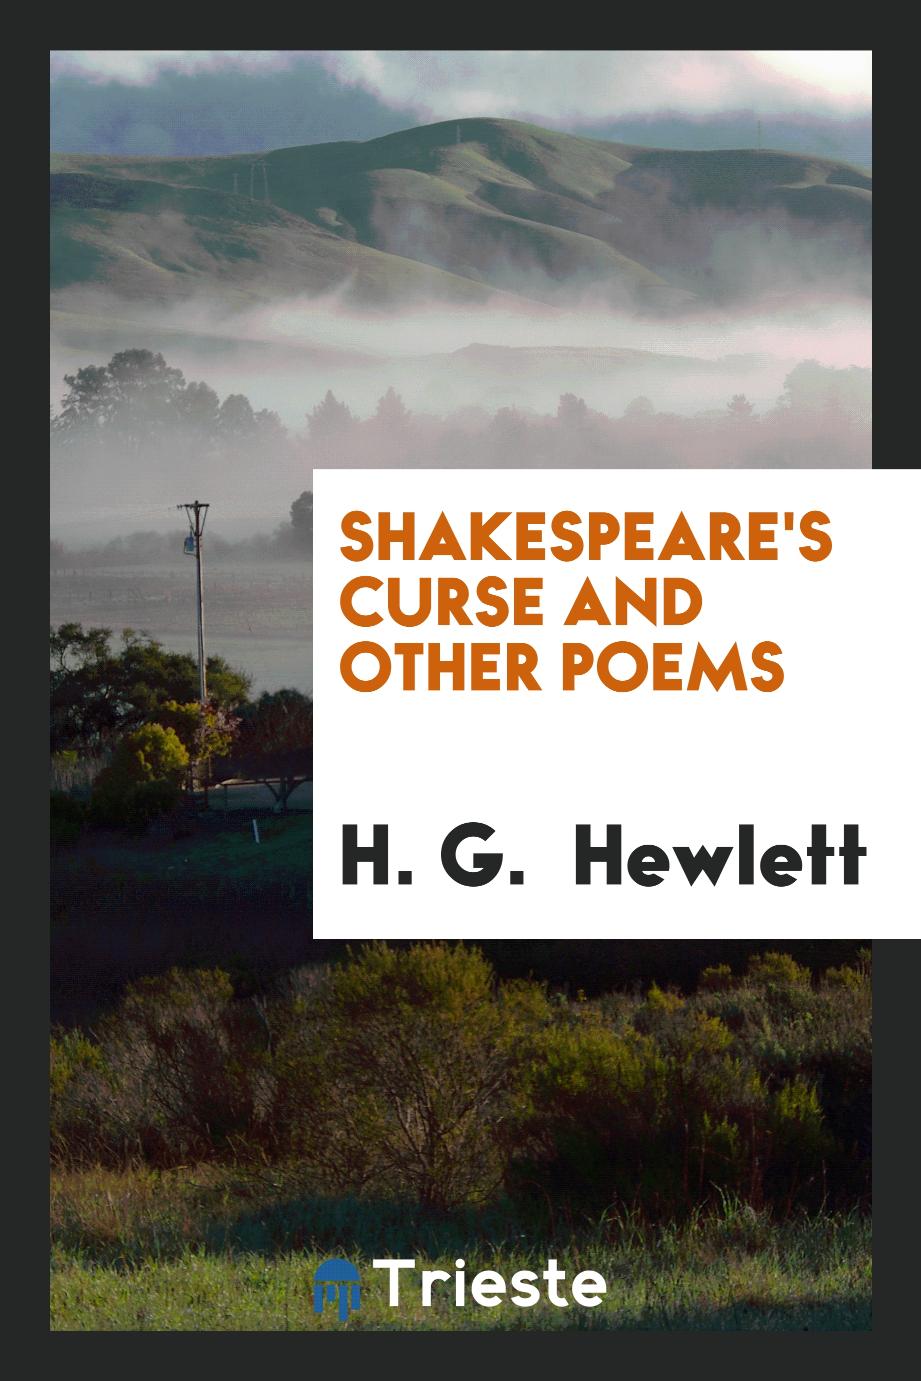 Shakespeare's Curse and Other Poems